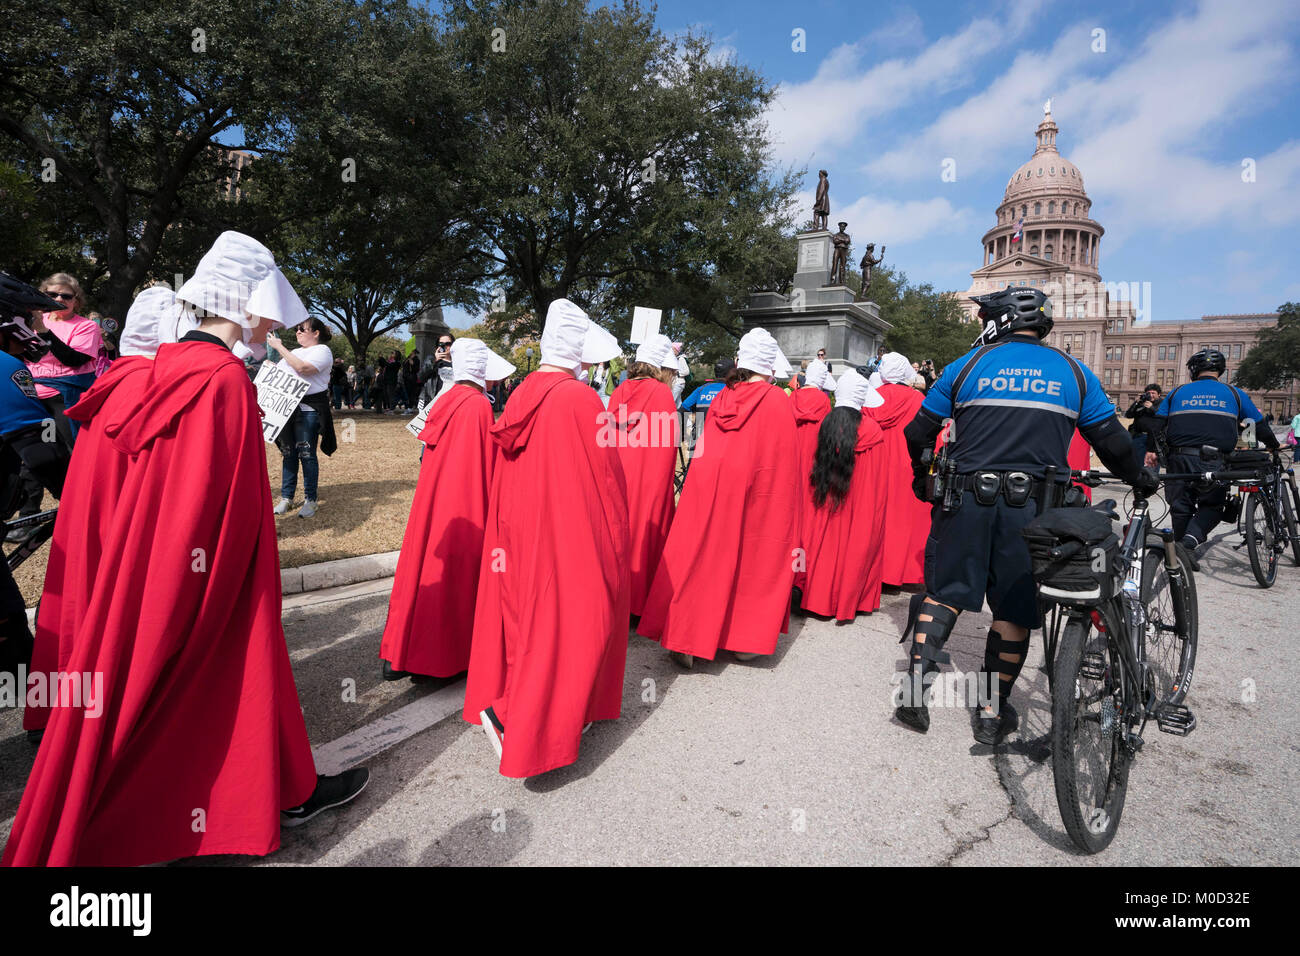 Women dressed as characters from Margaret Atwood's book 'A Handmaid's Tale' participate in a rally at the Texas Capitol in Austin commemorating the first anniversary of the Women's March on Washington and policies they oppose enacted during President Donald Trump's first year in office. Stock Photo